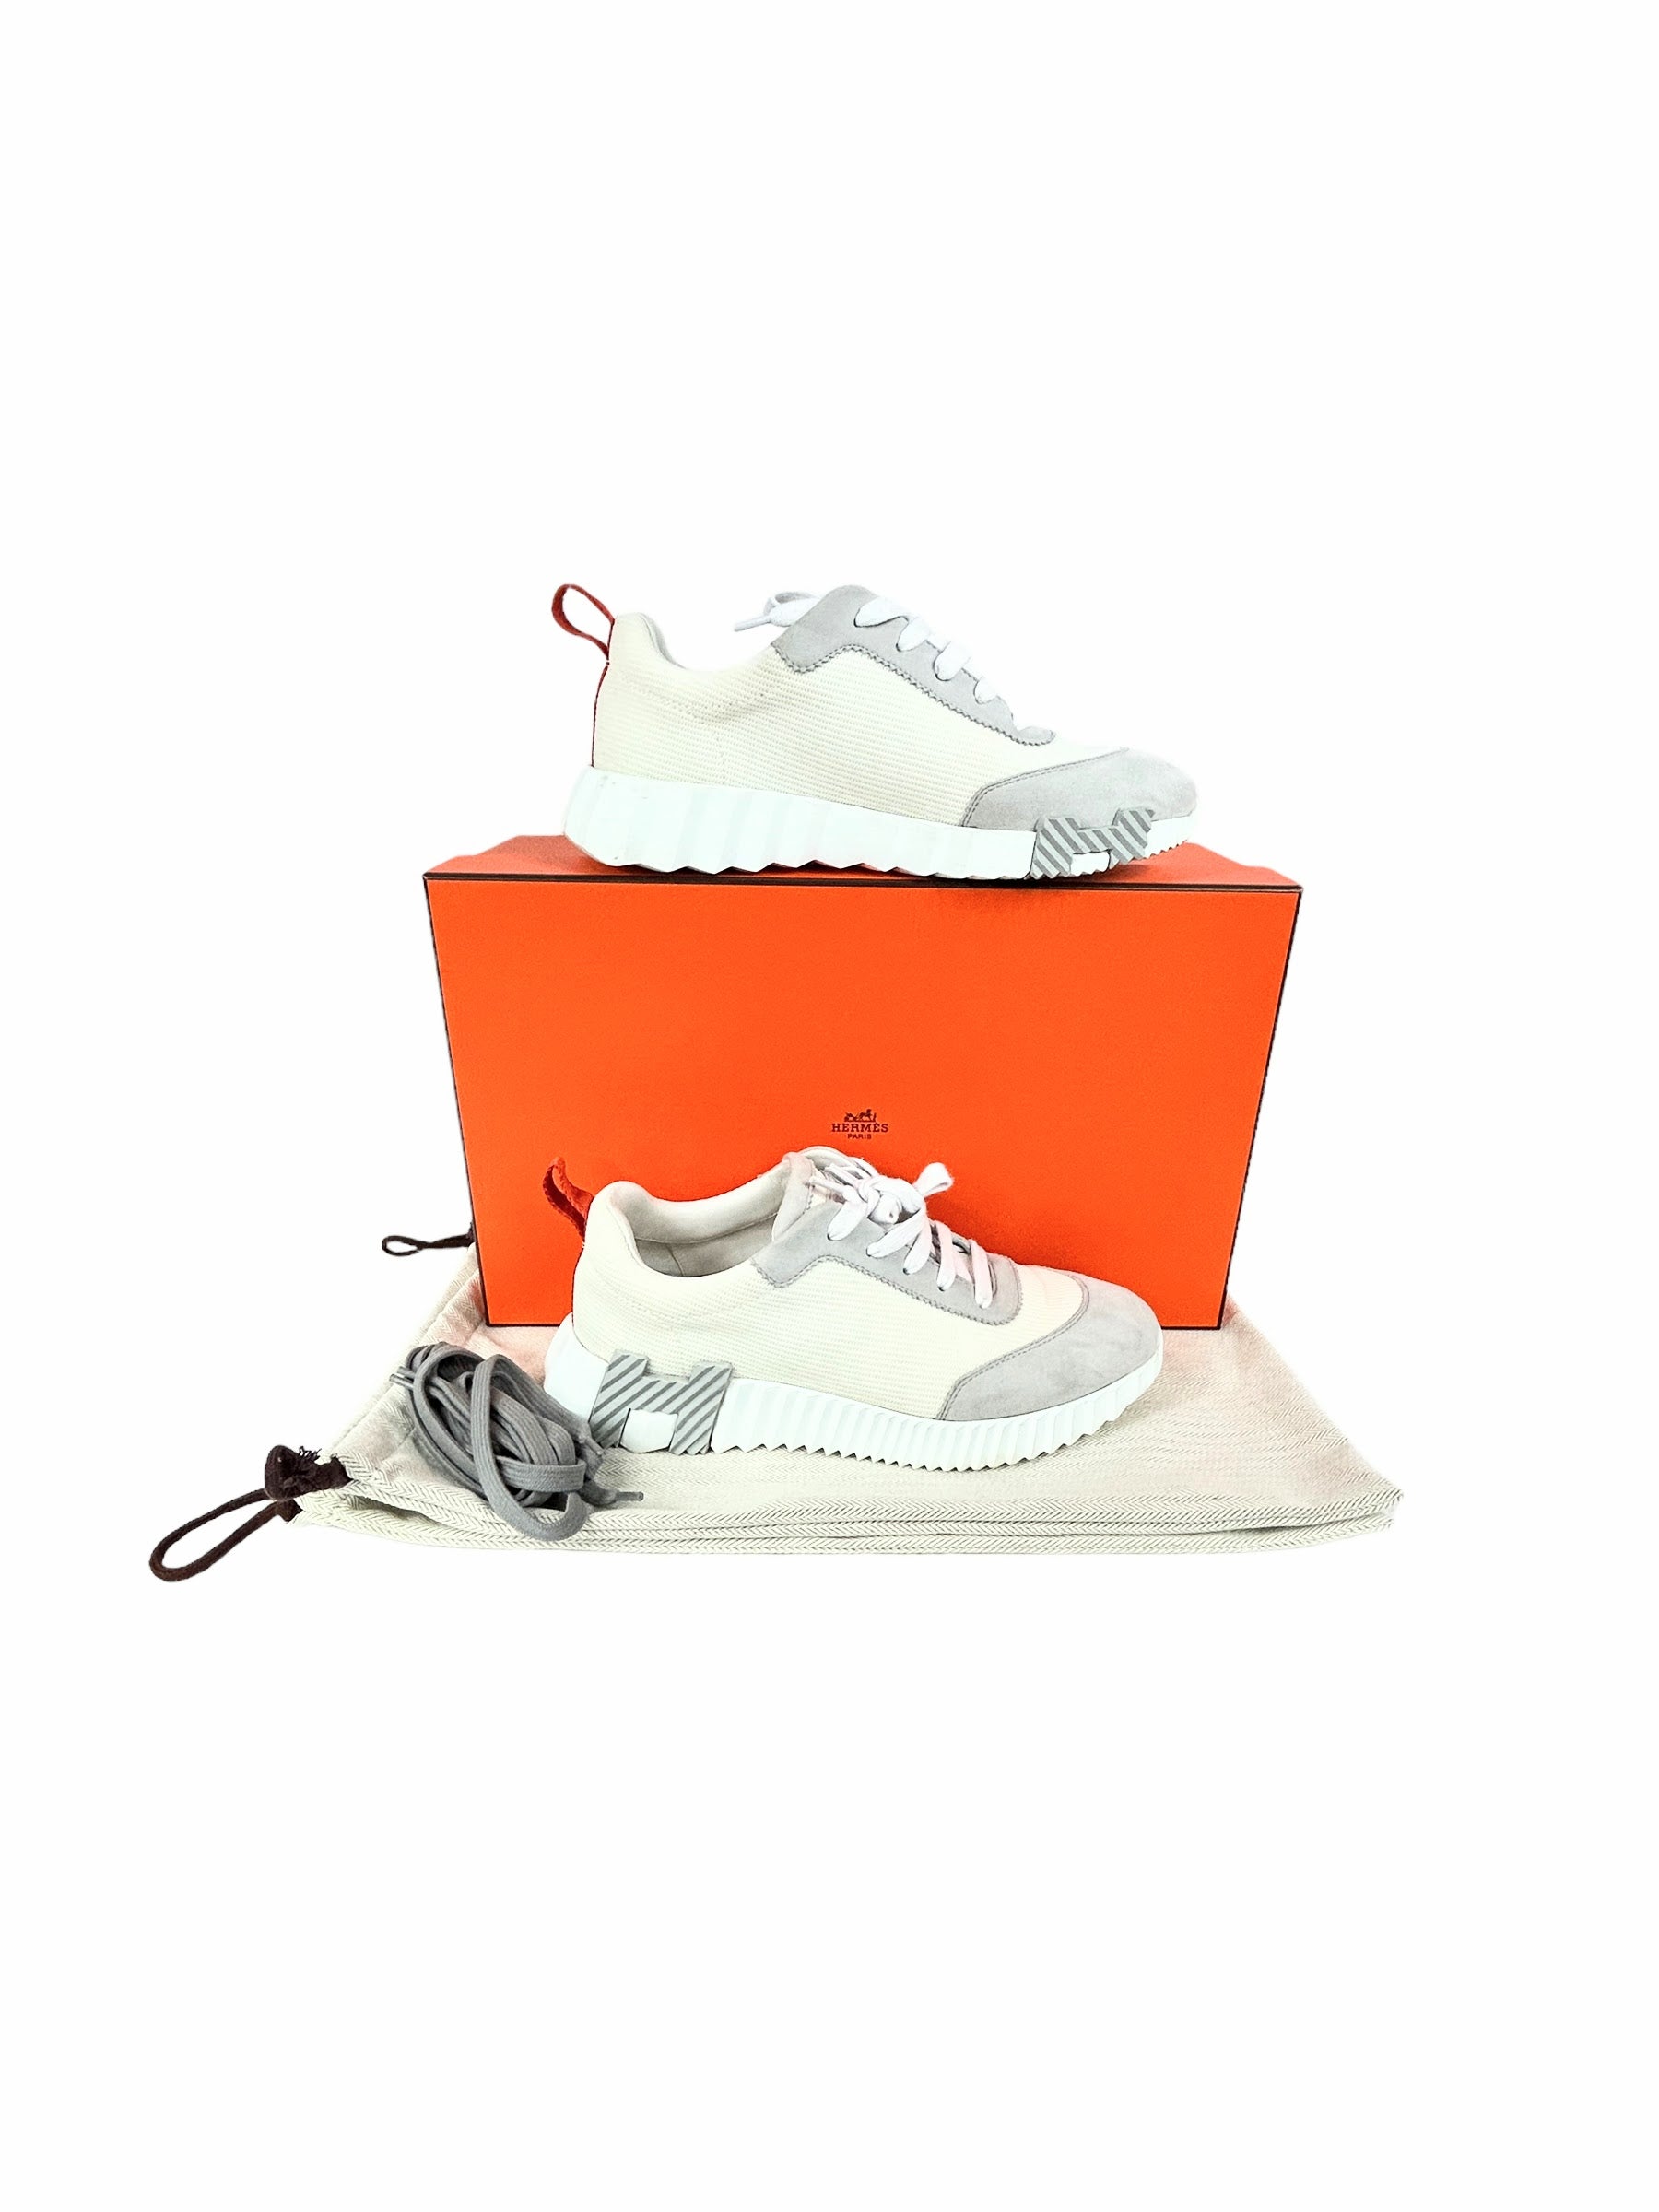 Femme Bouncing White Mesh/Chevre Leather Sneakers